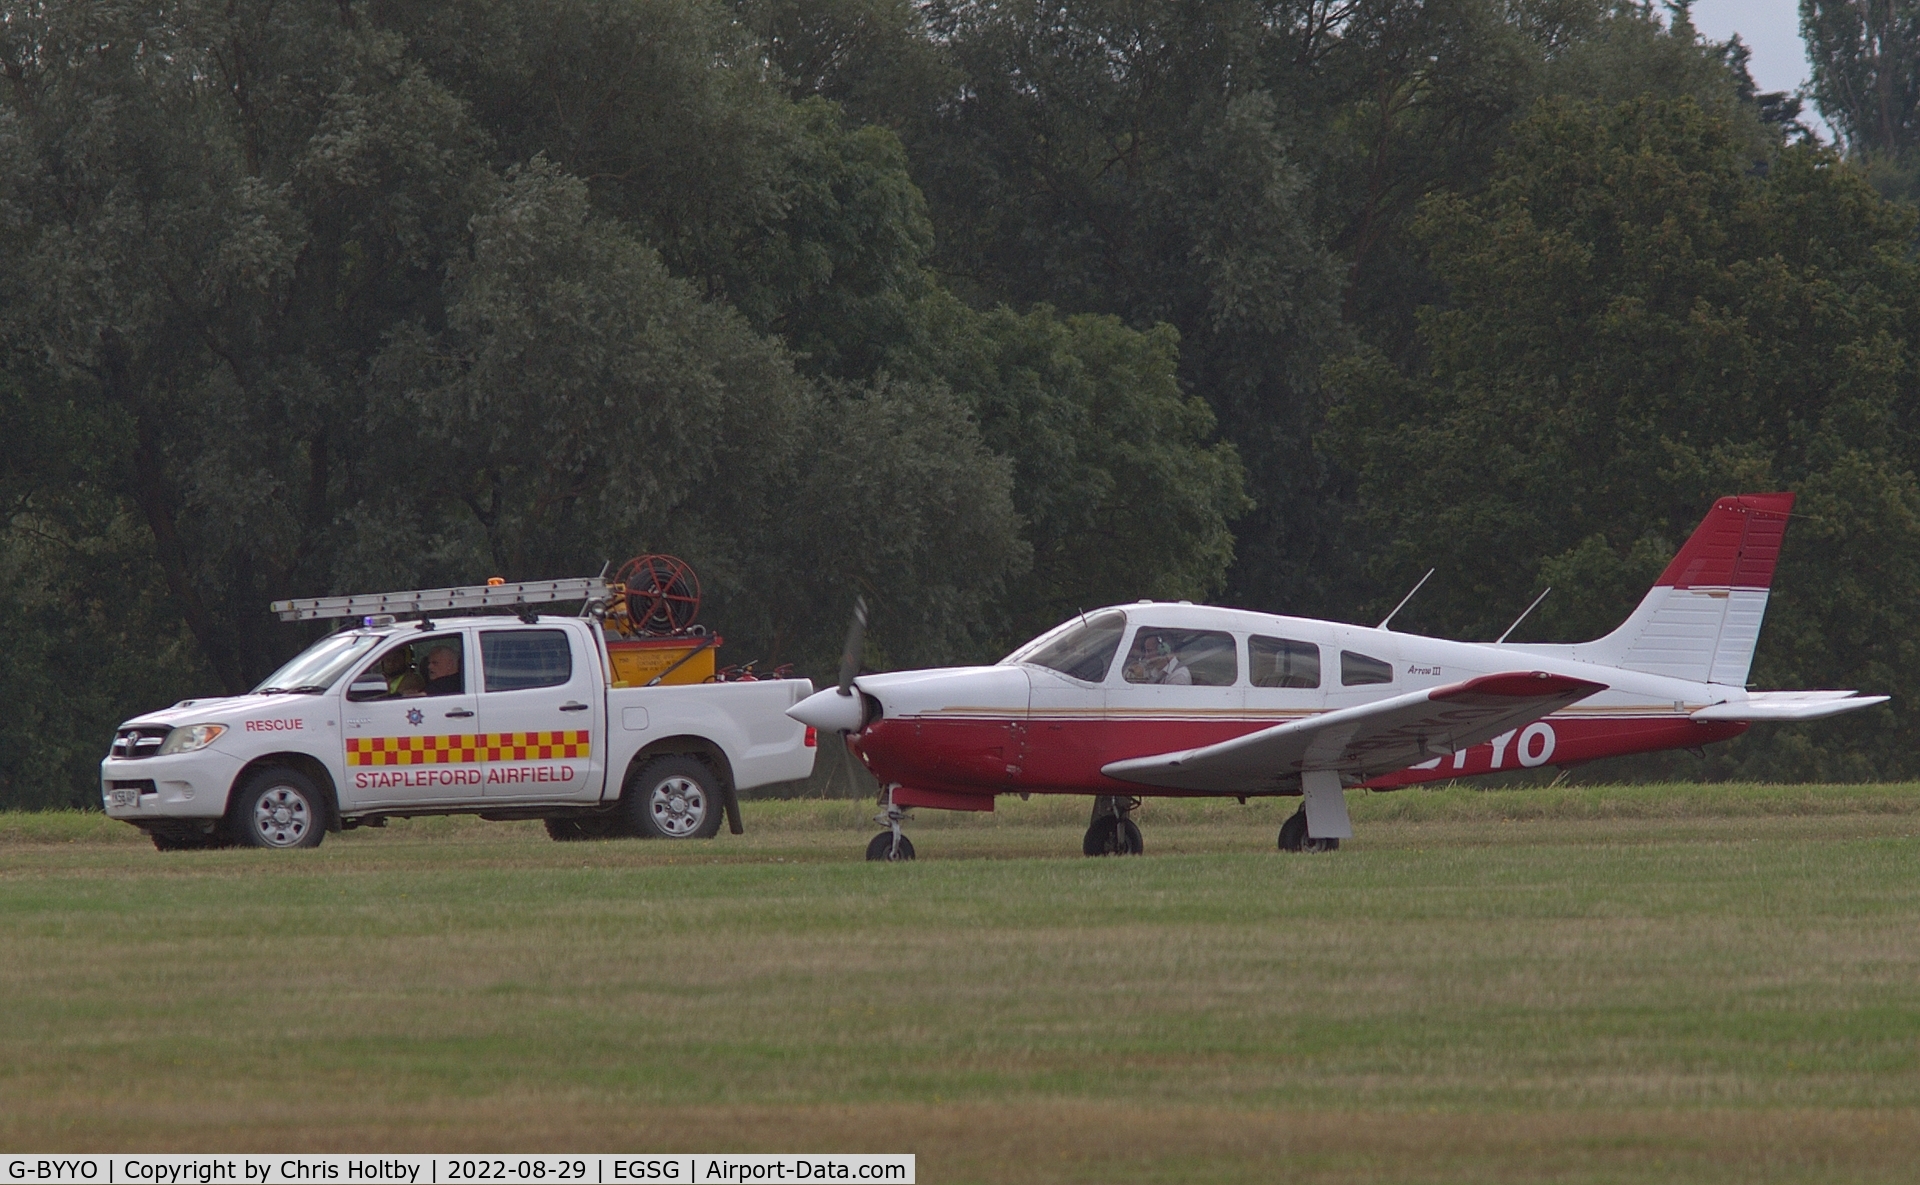 G-BYYO, 1994 Piper PA-28R-201 Cherokee Arrow III C/N 28R-2837061, Pilot alerted EGSG control tower to a possible landing gear problem but landed safely escorted by the airfield rescue service vehicle.